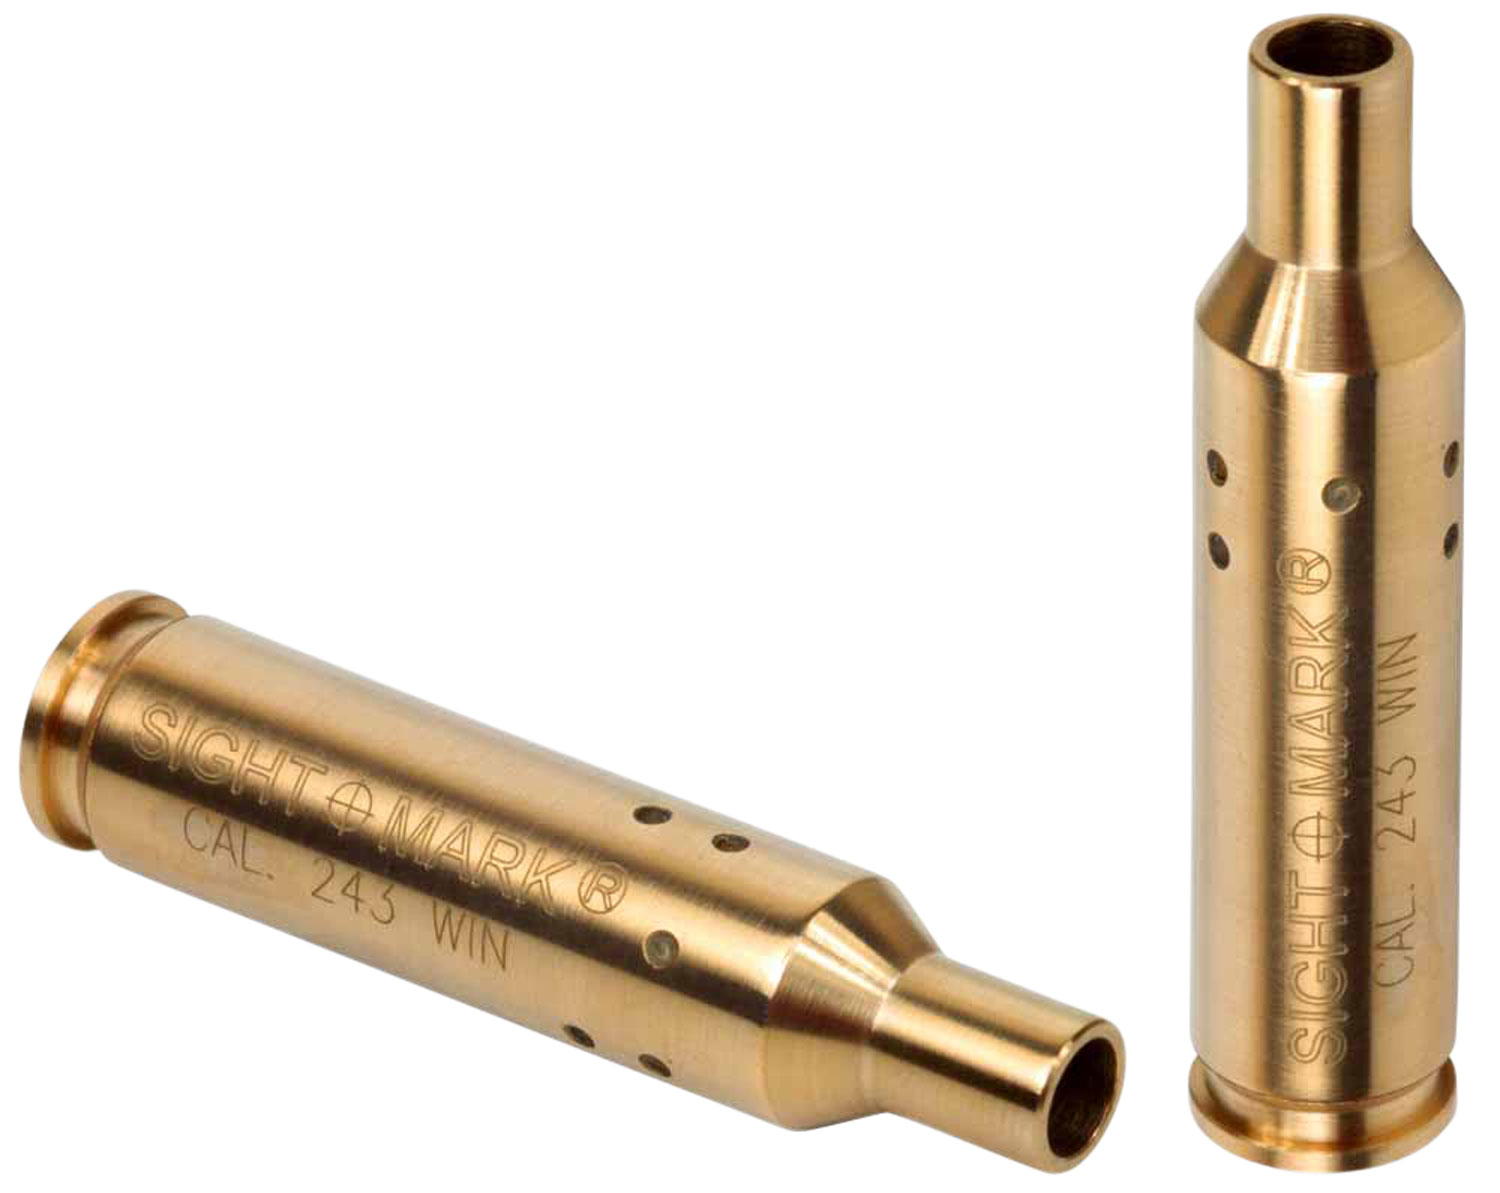 Sightmark SM39005 Rifle Boresight Red Laser made of Brass for 308 Win, 243 Win & 7.62x51mm NATO Calibers